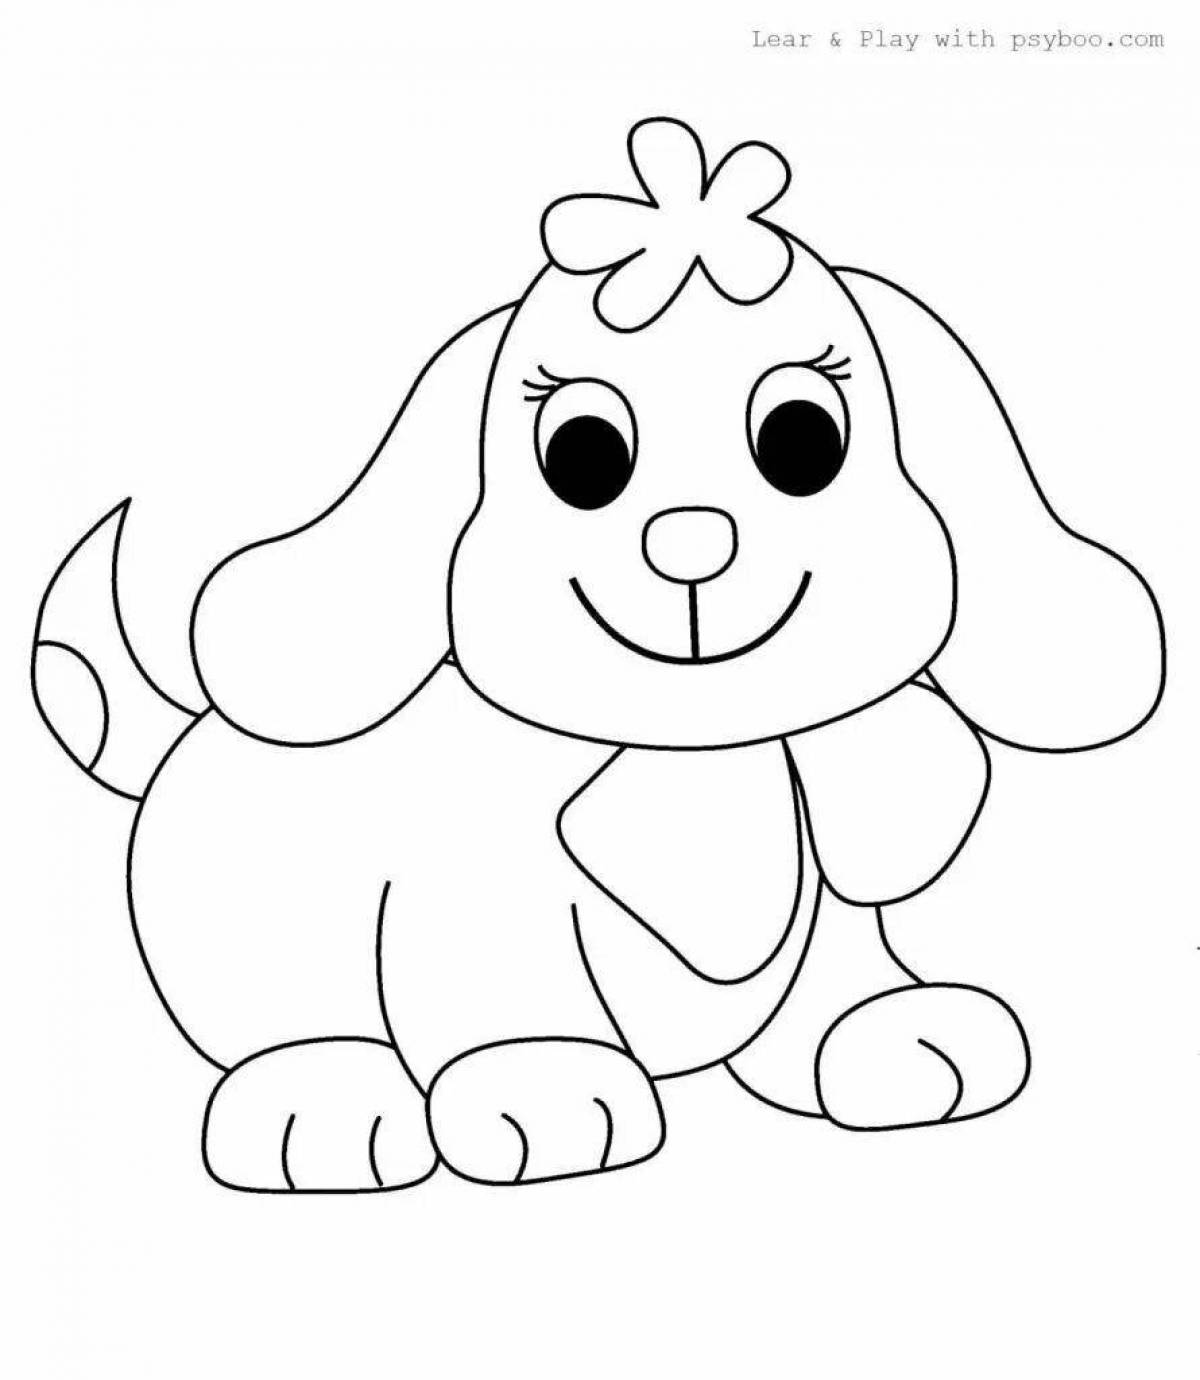 Colourful dog coloring book for 2-3 year olds